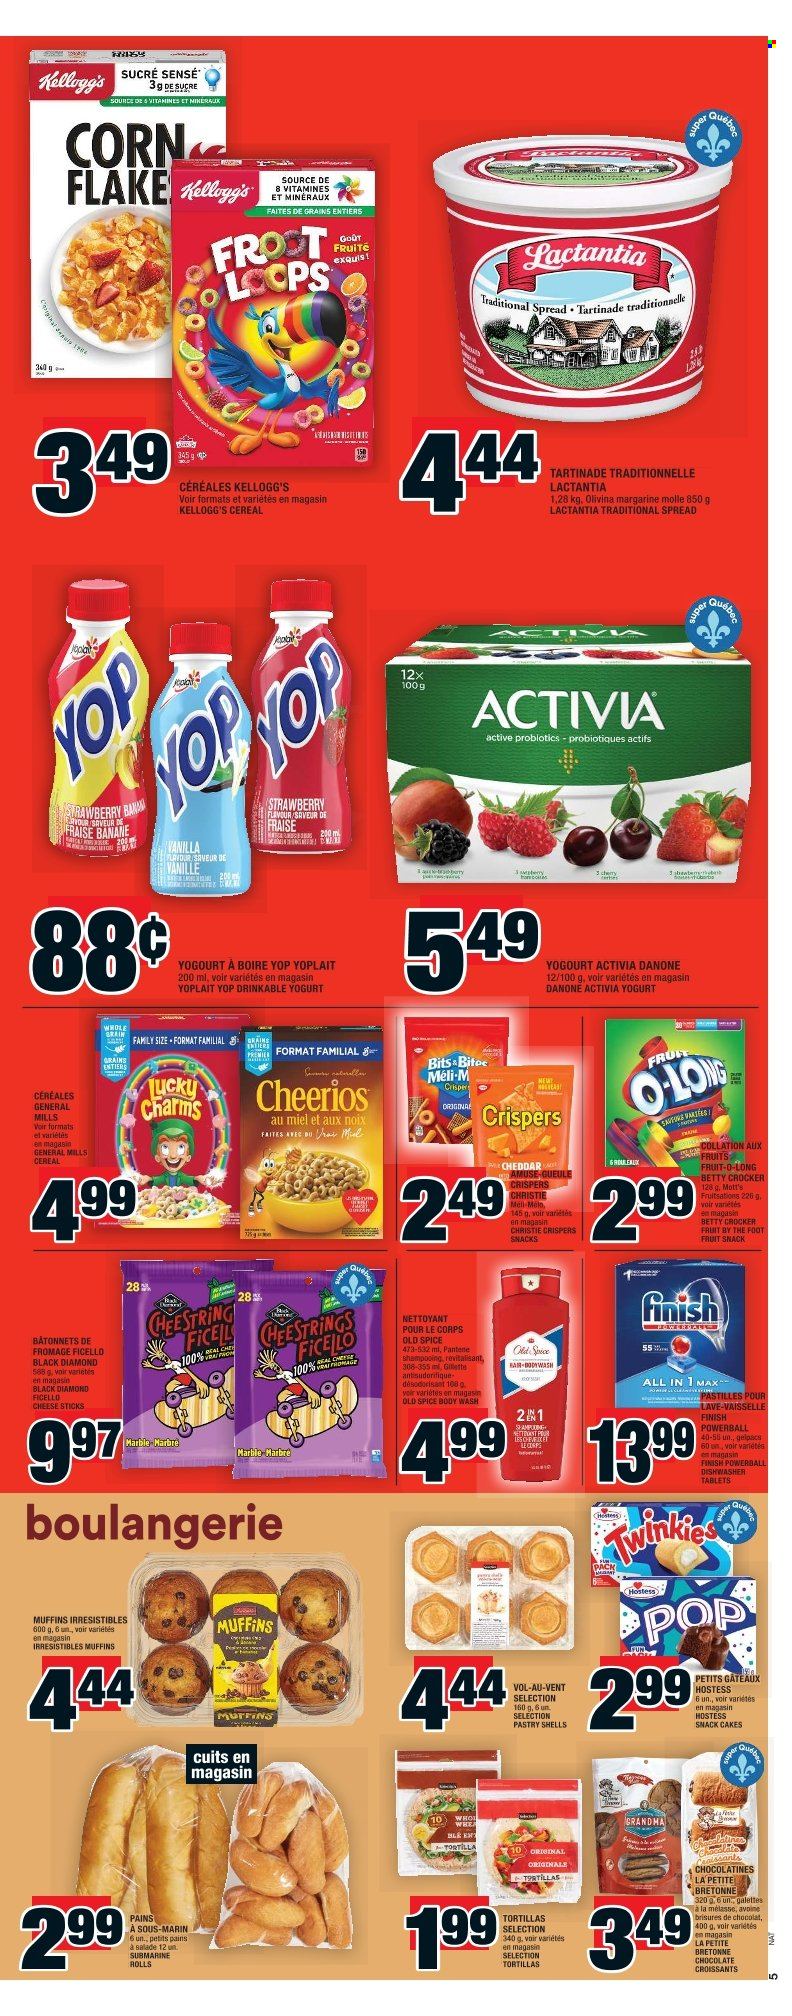 thumbnail - Super C Flyer - December 01, 2022 - December 07, 2022 - Sales products - tortillas, cake, croissant, muffin, corn, cherries, Mott's, string cheese, cheddar, cheese, yoghurt, Activia, Yoplait, margarine, cheese sticks, chocolate, snack, Kellogg's, pastilles, fruit snack, cereals, Cheerios, spice, dishwasher cleaner, Finish Powerball, dishwasher tablets, body wash, Gillette, probiotics, Pantene, Old Spice, Danone. Page 6.